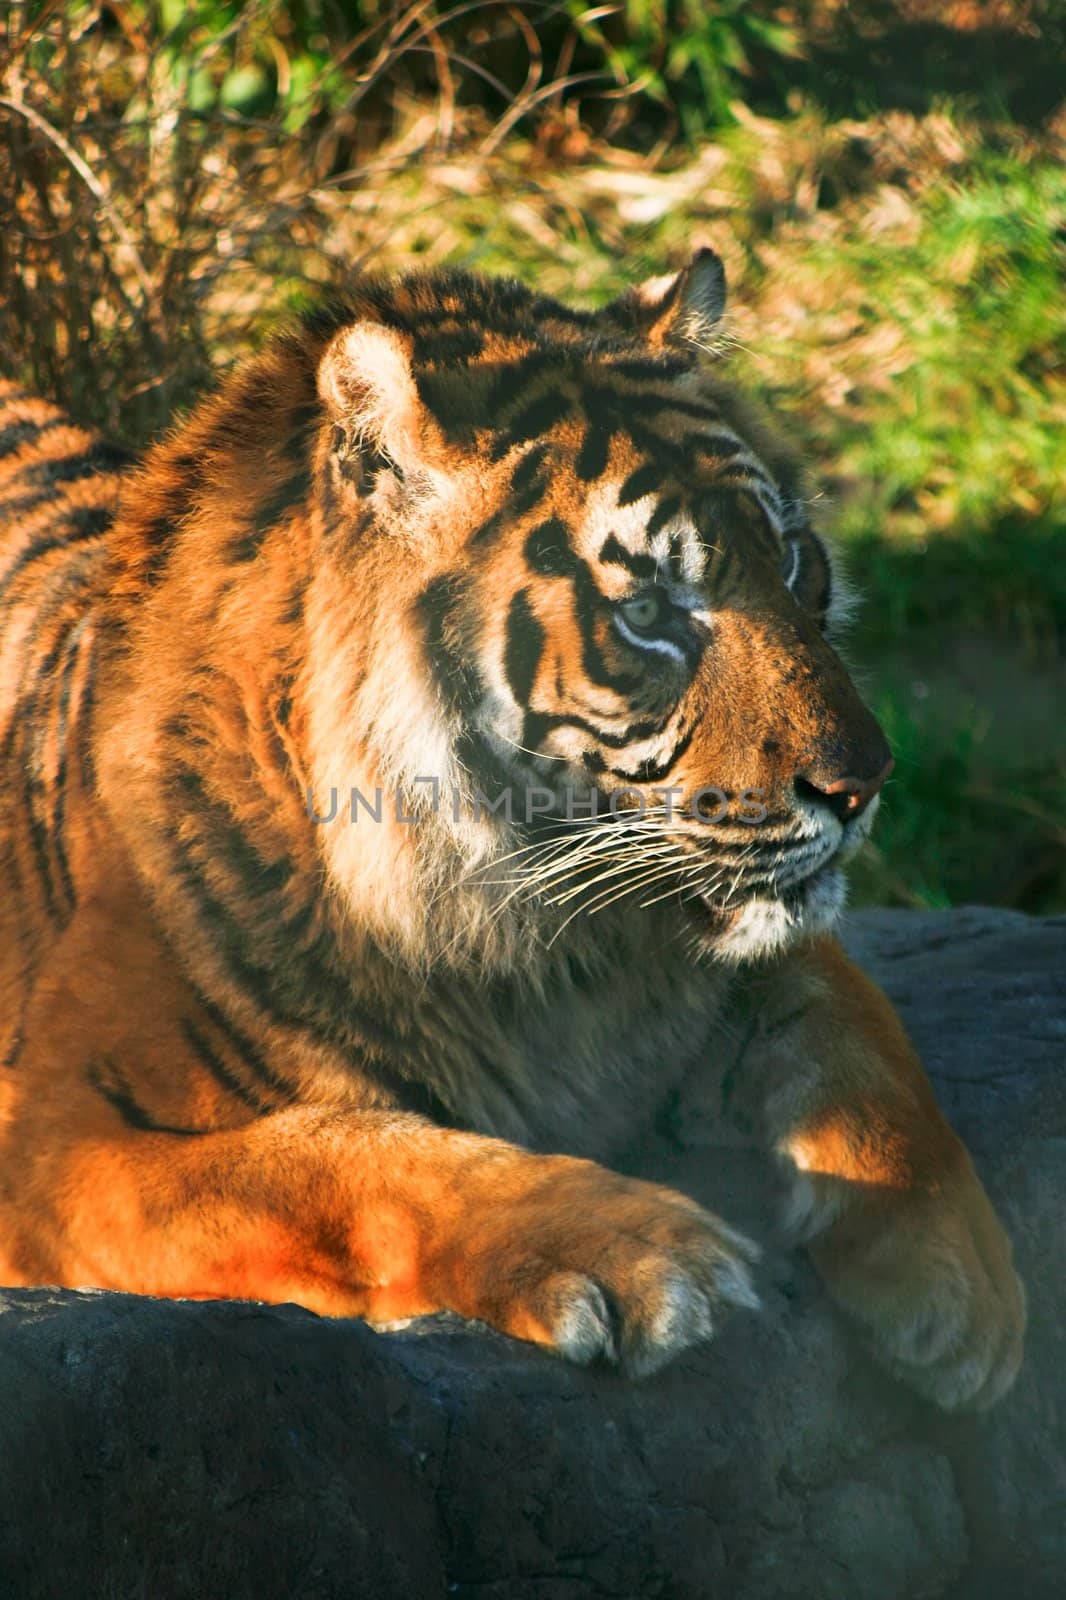 Late afternoon winter sun gives warm colors to the tigers fur